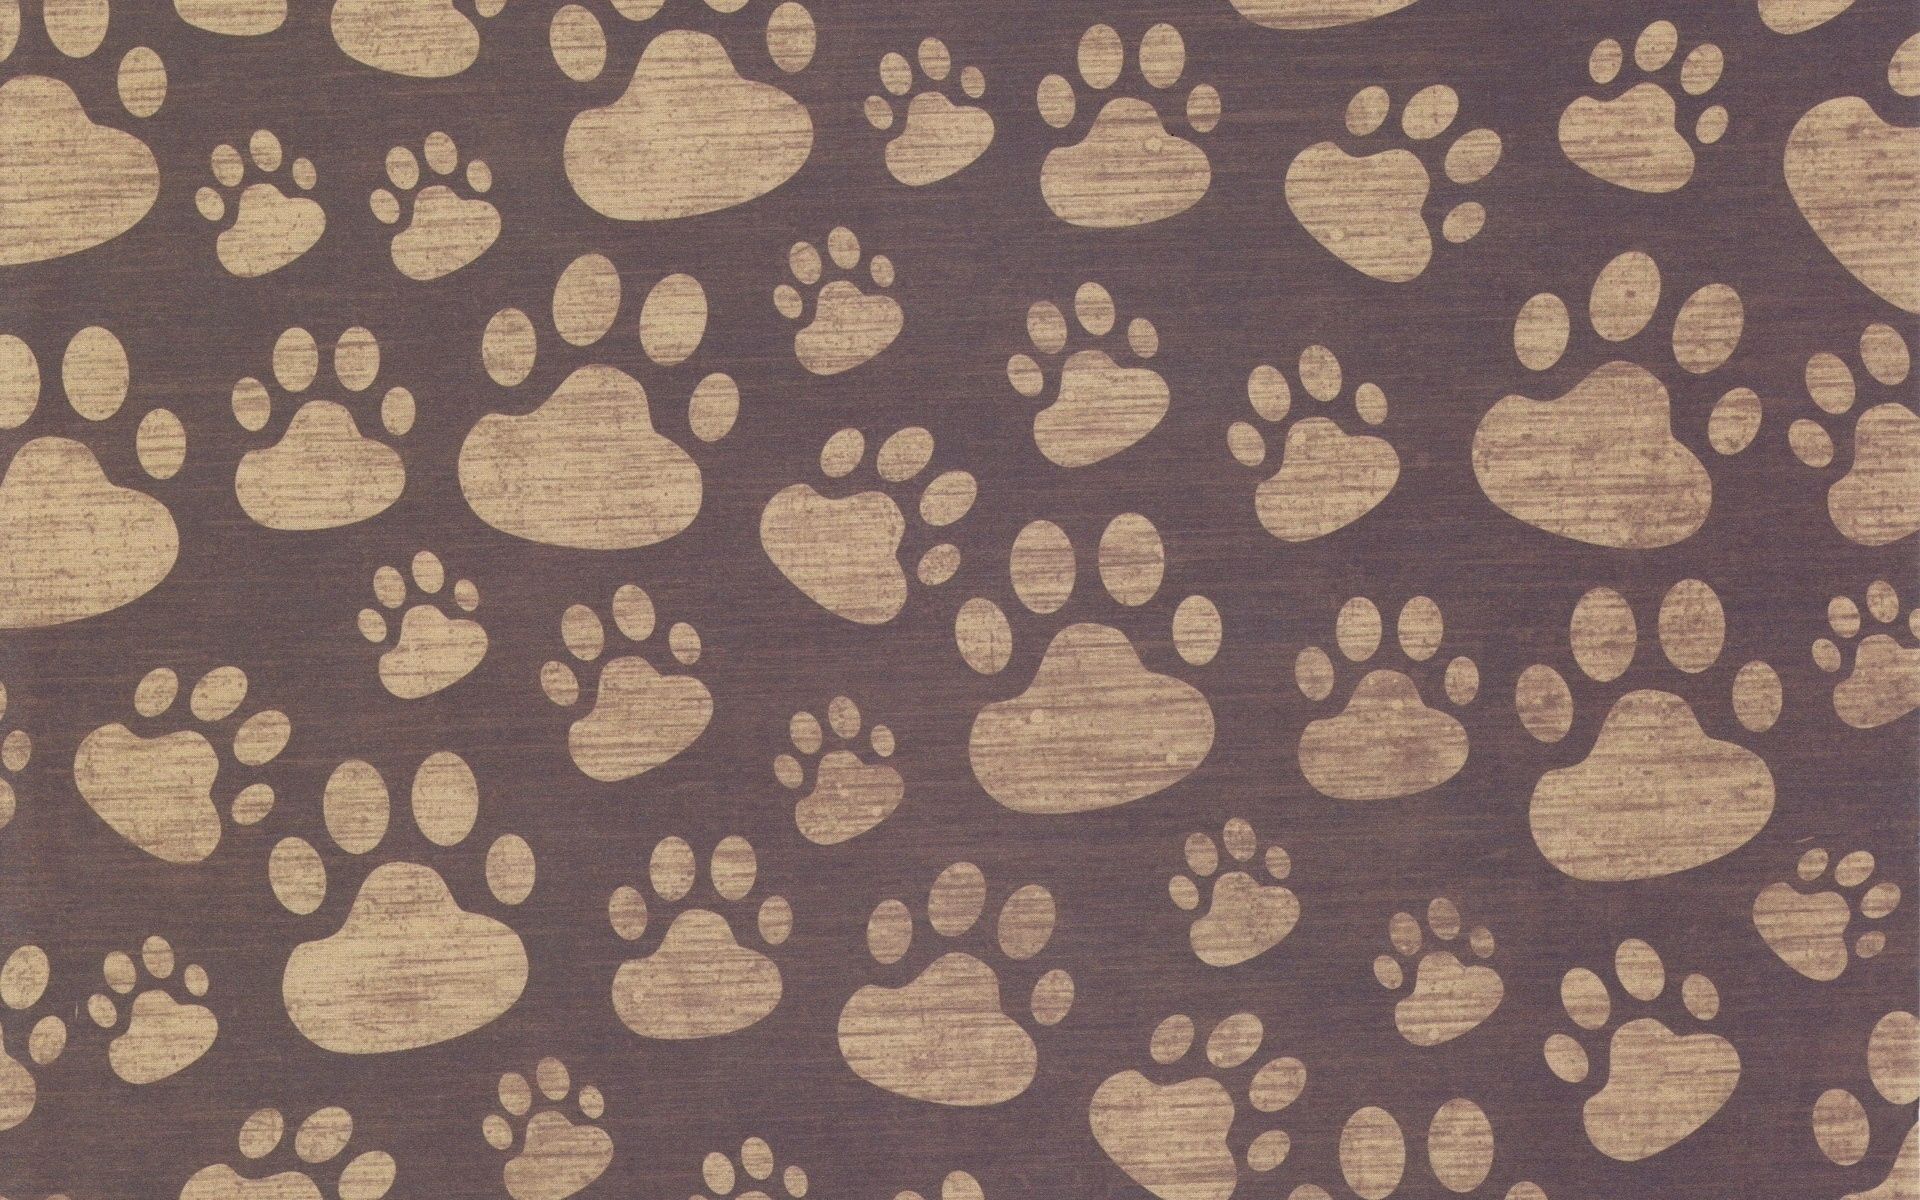 wallpapers picture, background, texture, textures, surface, drawing, paws, imprint